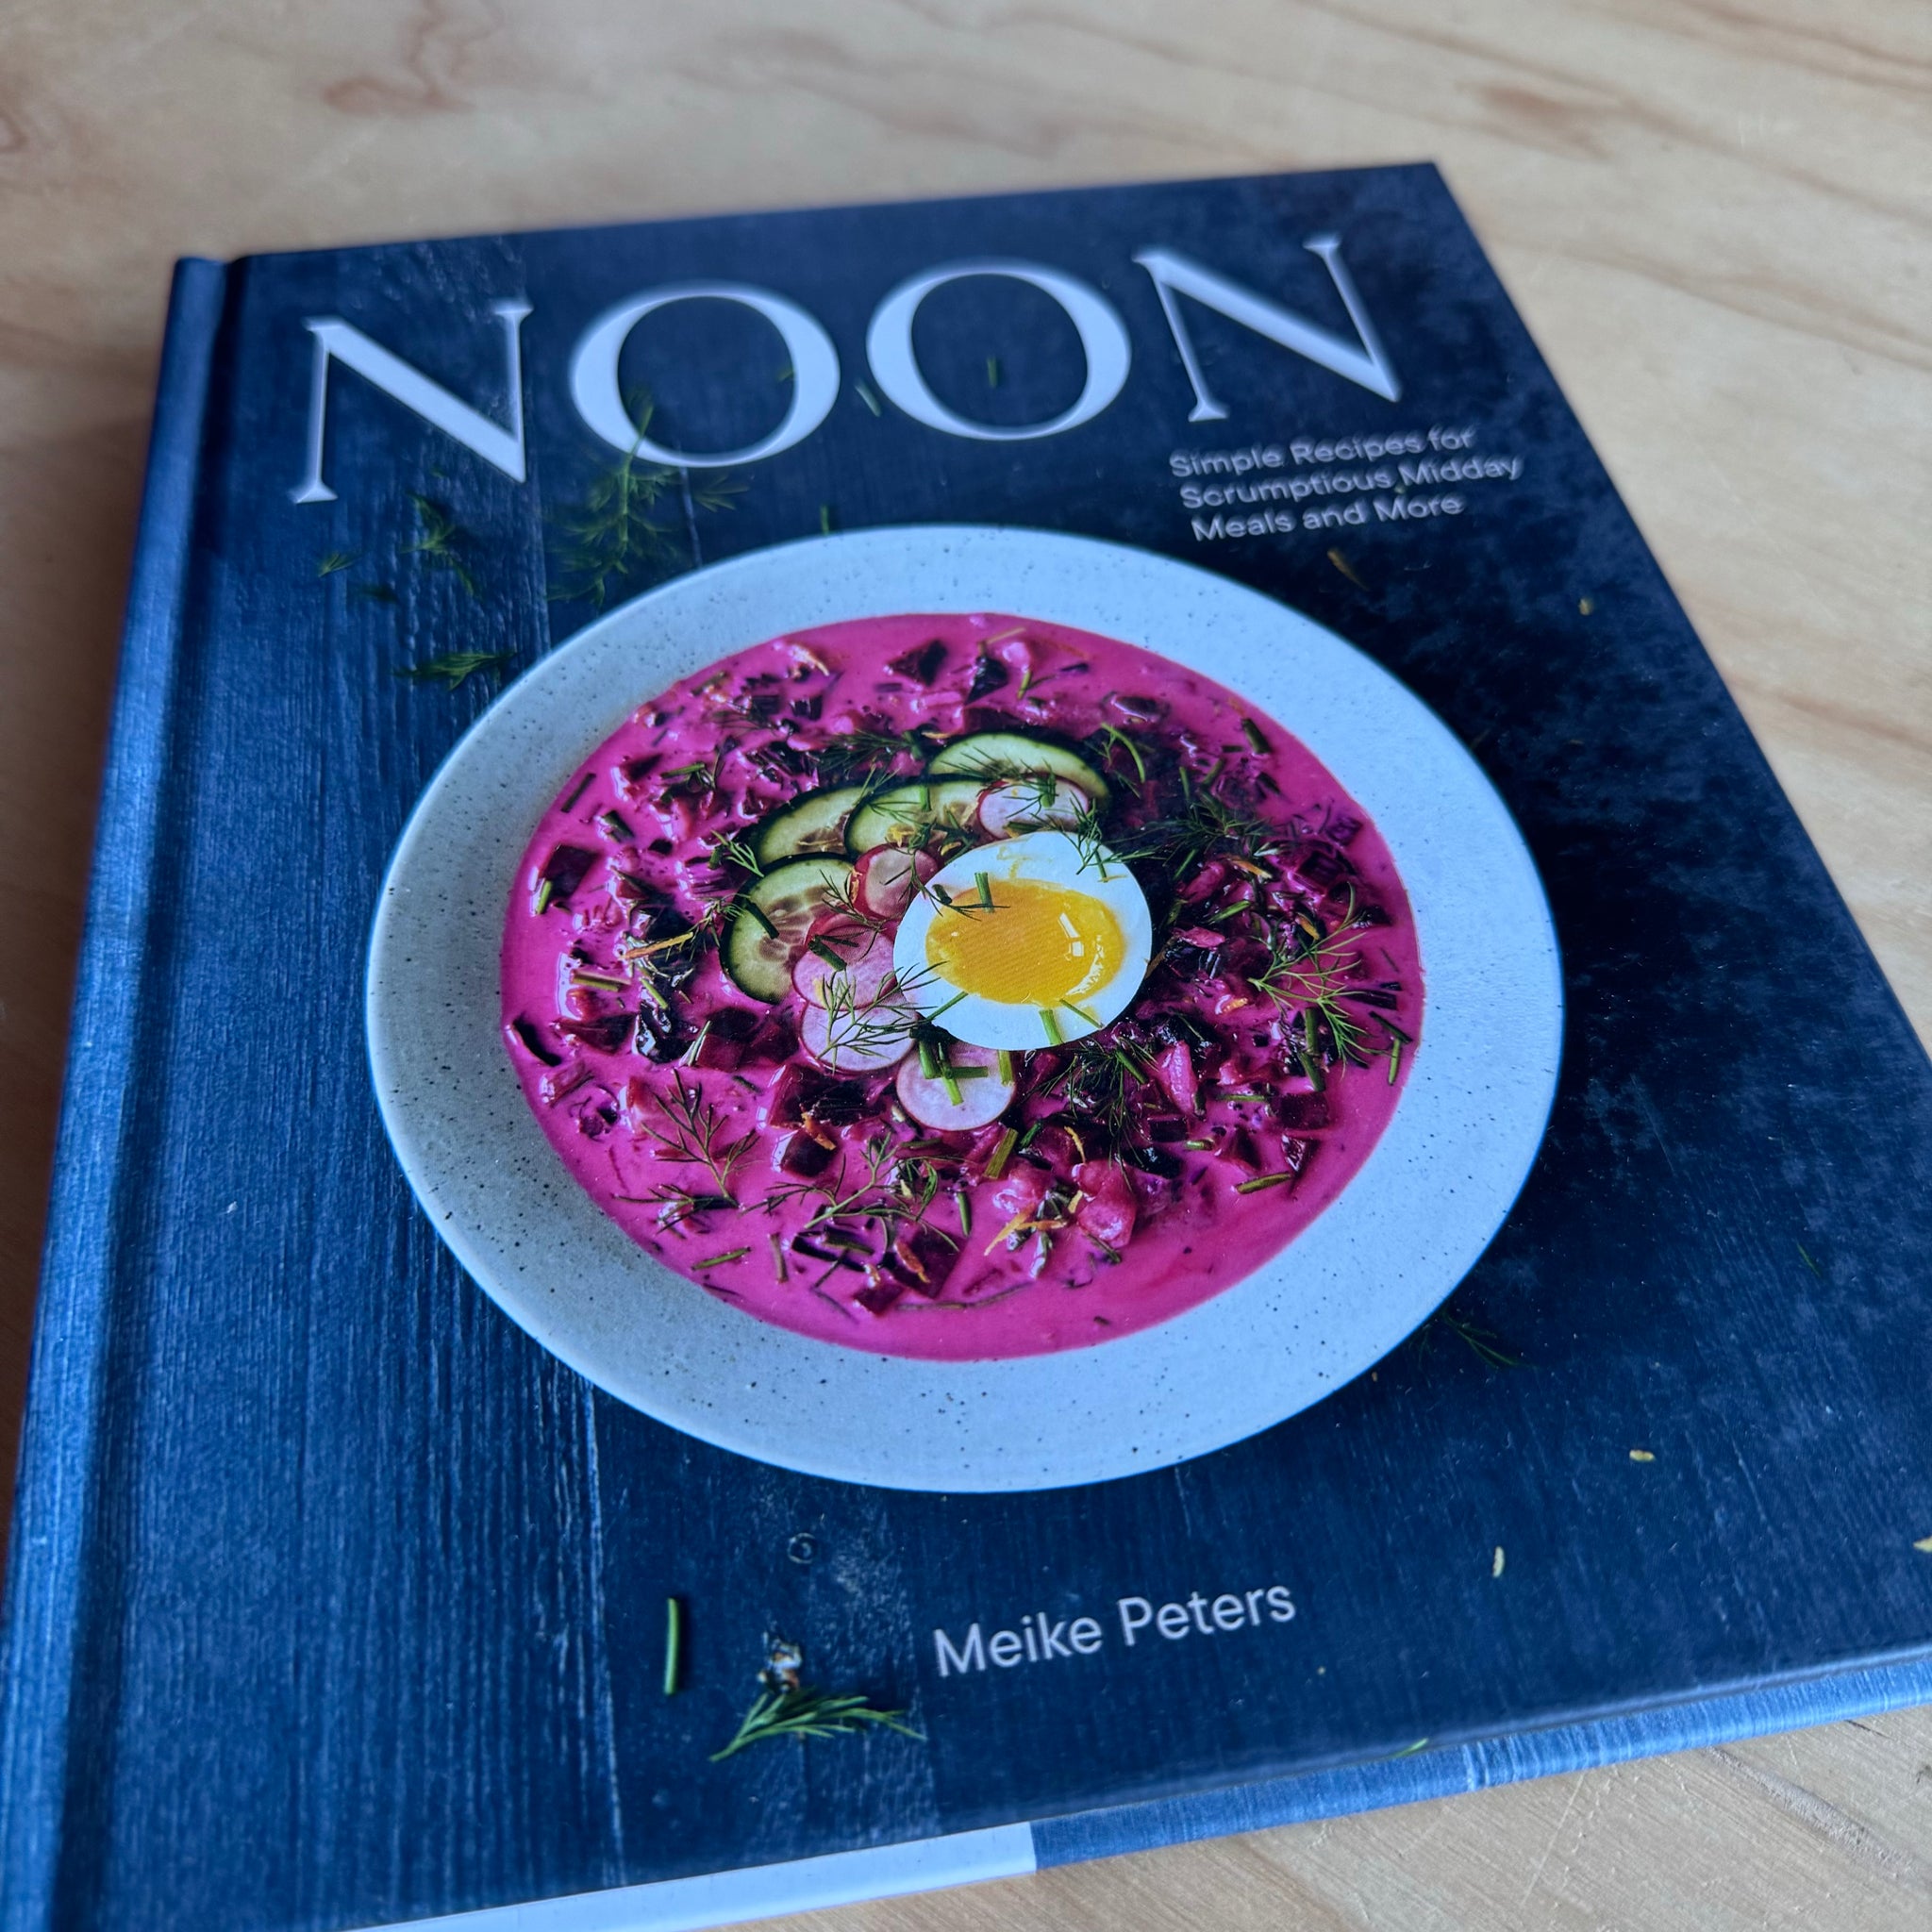 Noon, Simple Recipes for Scrumptious Midday Meals